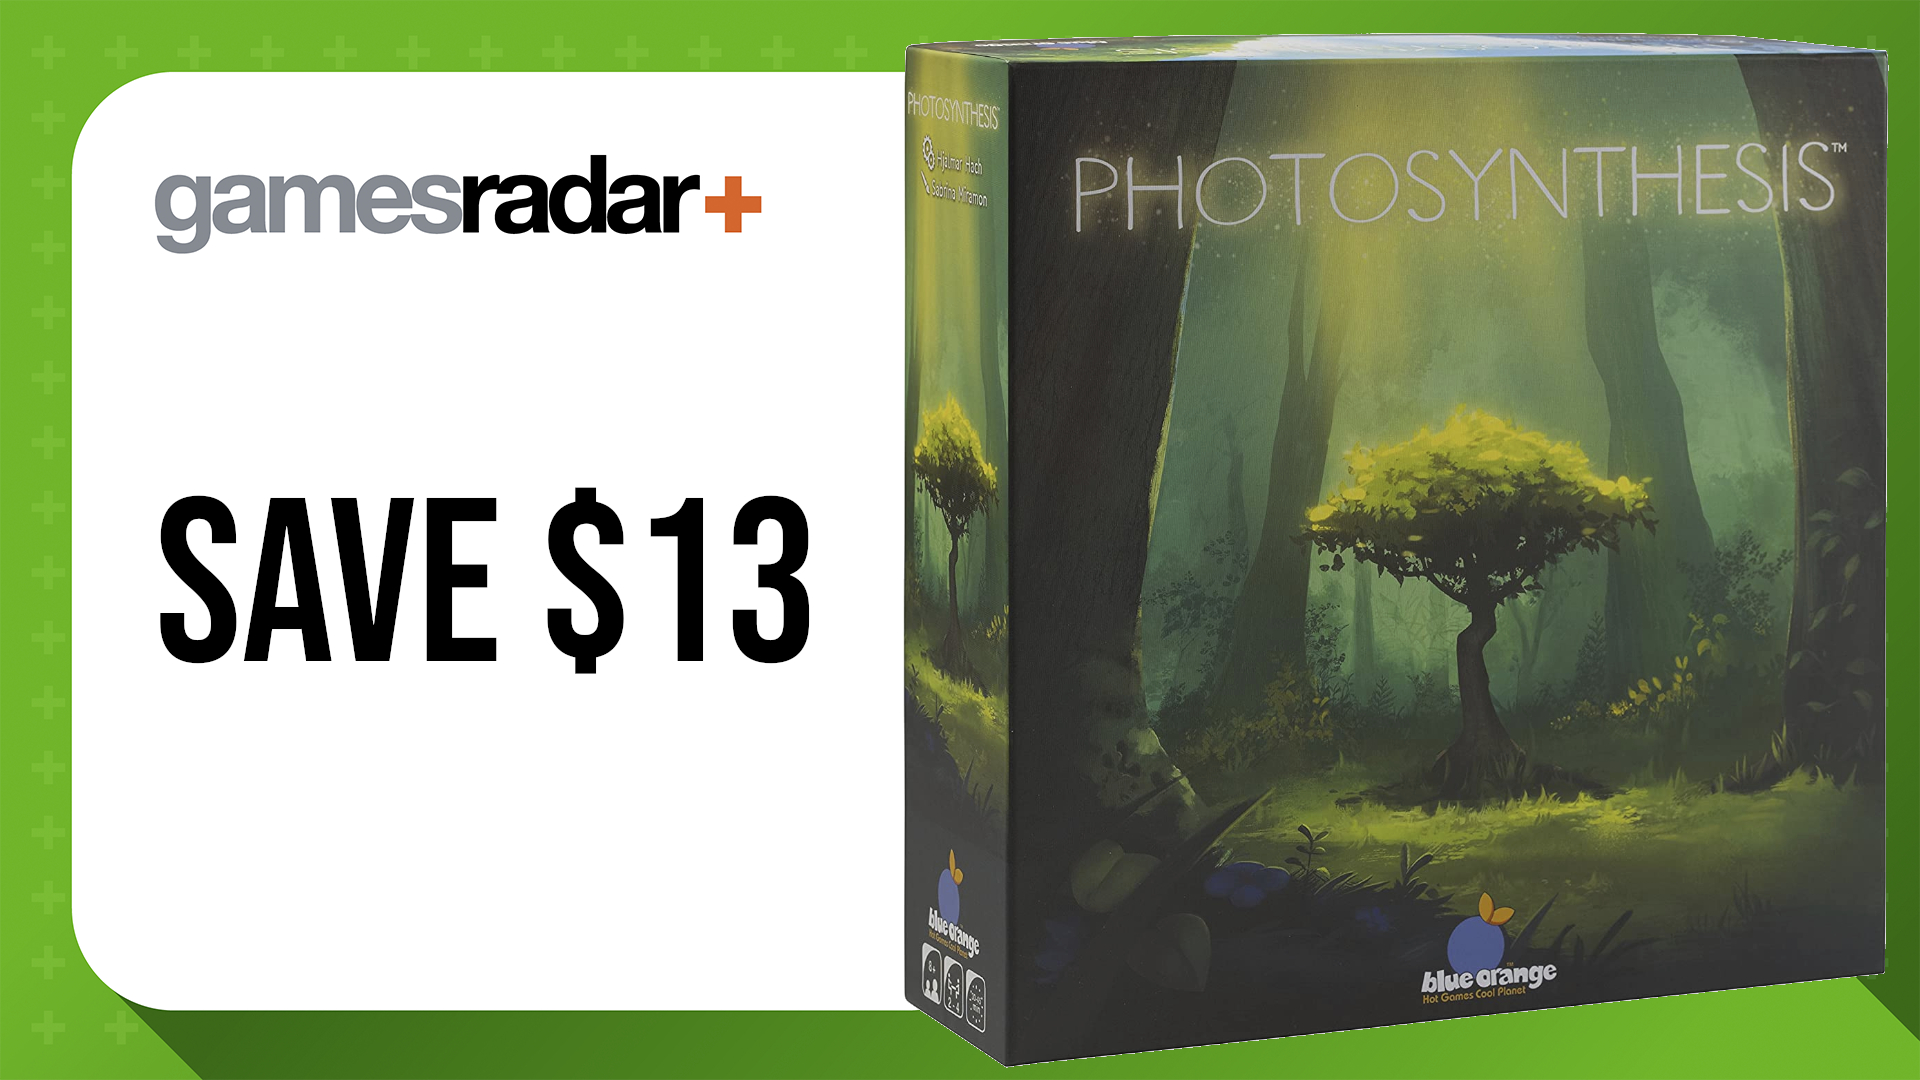 Cyber Monday board game deals with Photosynthesis